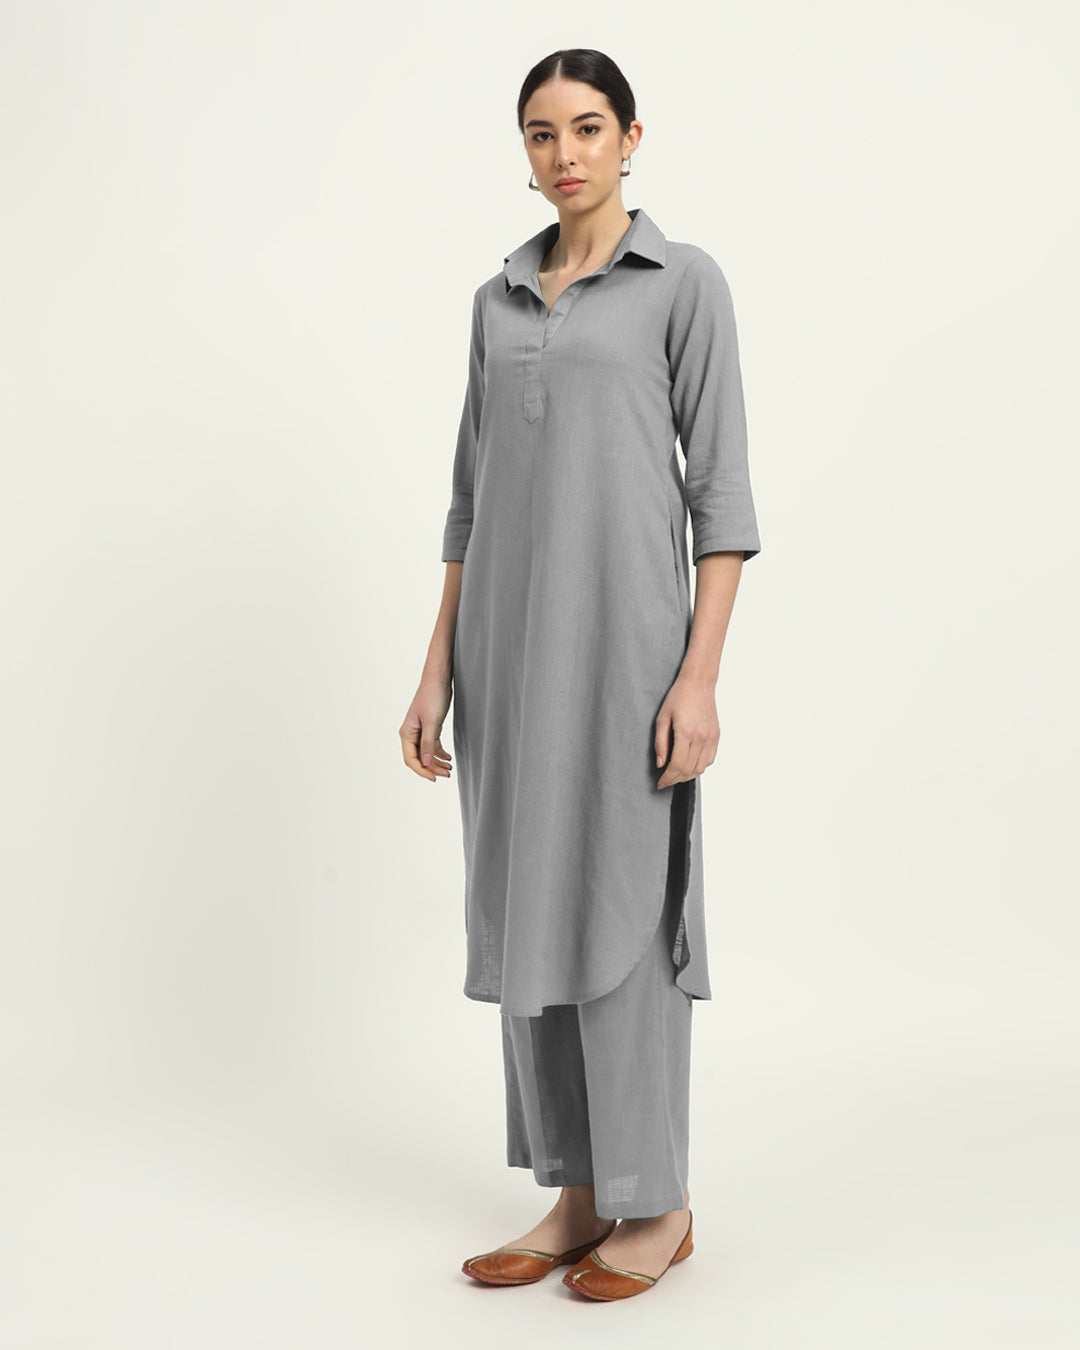 Iced Grey Collar Comfort Solid Kurta (Without Bottoms)